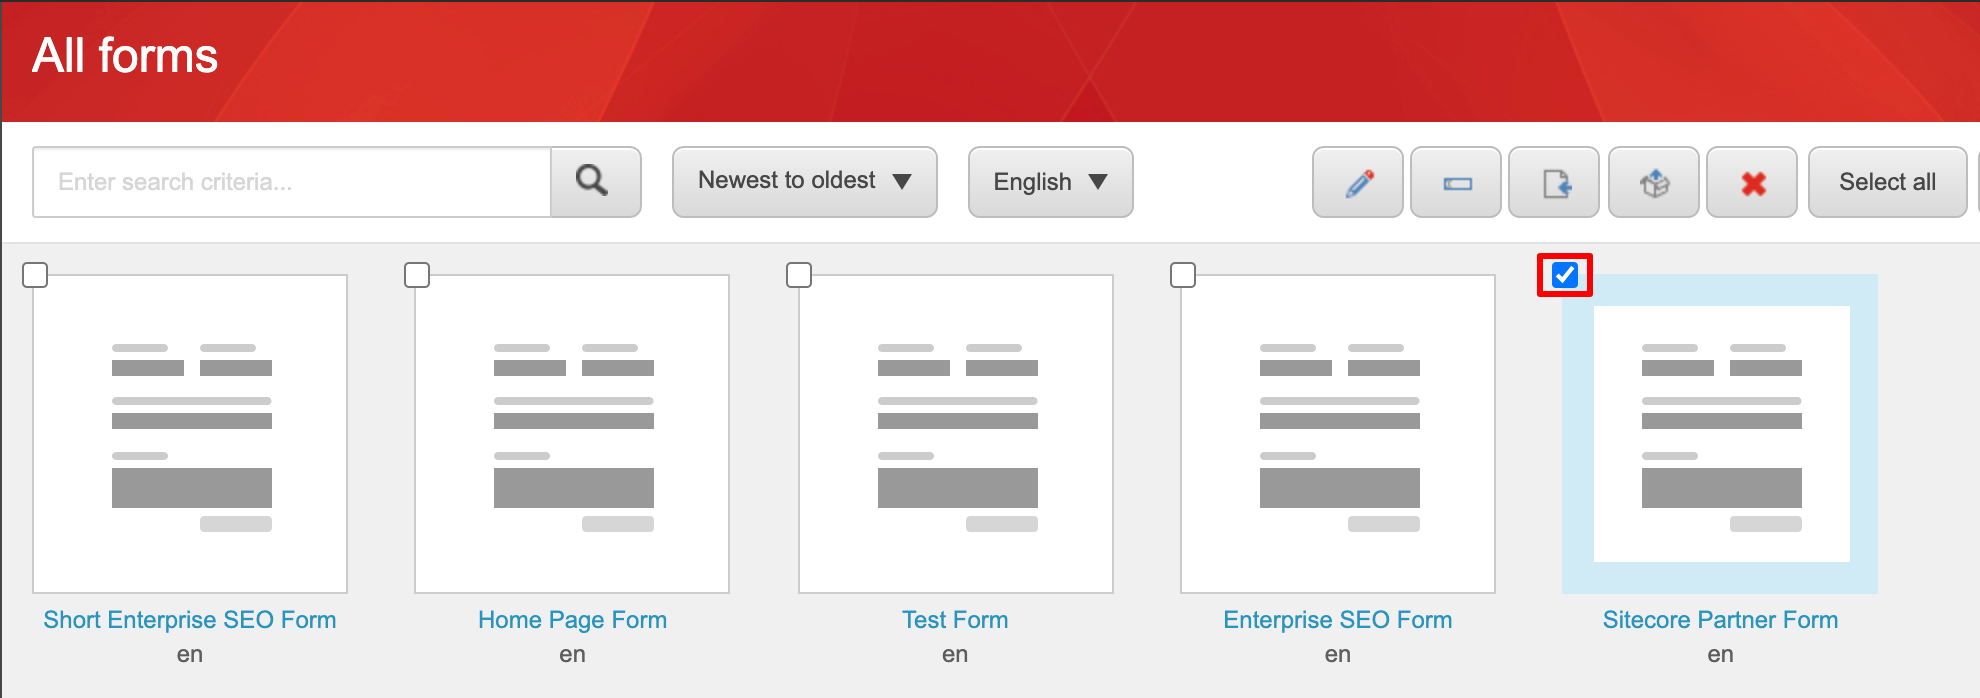 Selecting a form in Sitecore